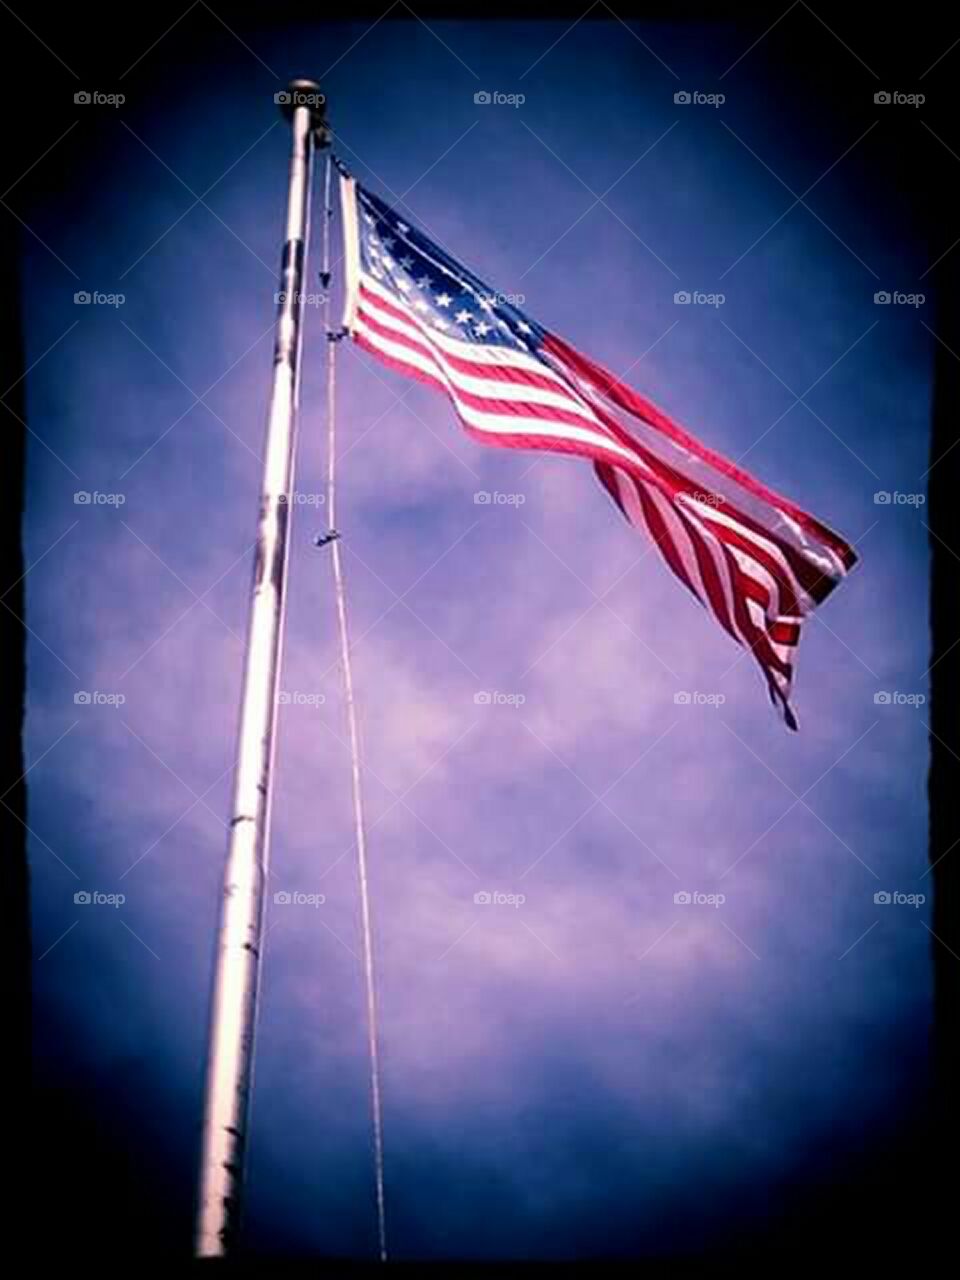 image of American flag on flag pole flying in the wind with blue sky background